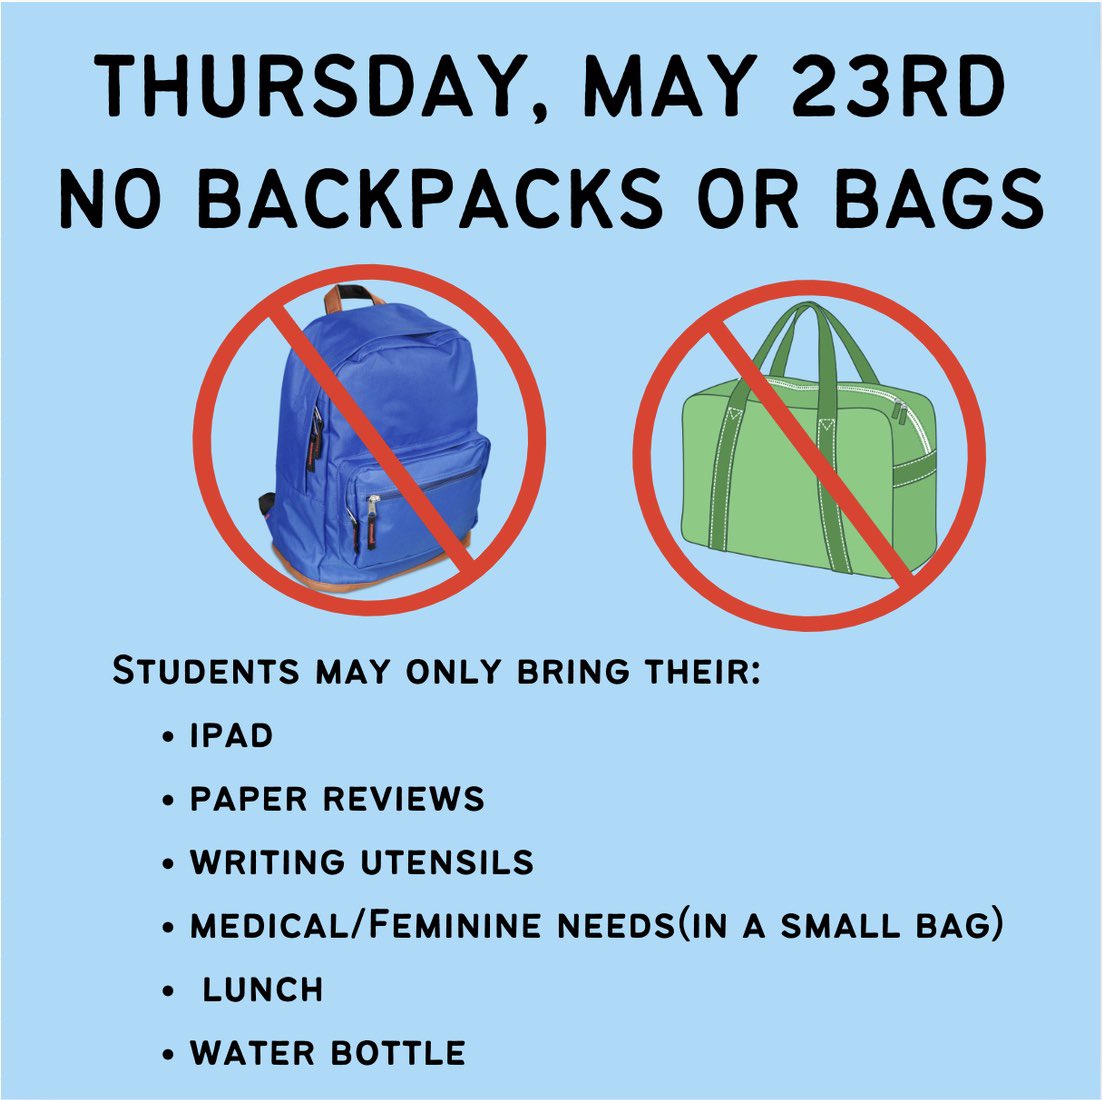 As we near the last day of school for the 2023-2024 school year, please remember that on Thursday May 23 students should not bring backpacks or bags to school. Students should bring their fully charged iPad so that they can be successful on their final exams. #TodayatLHSK